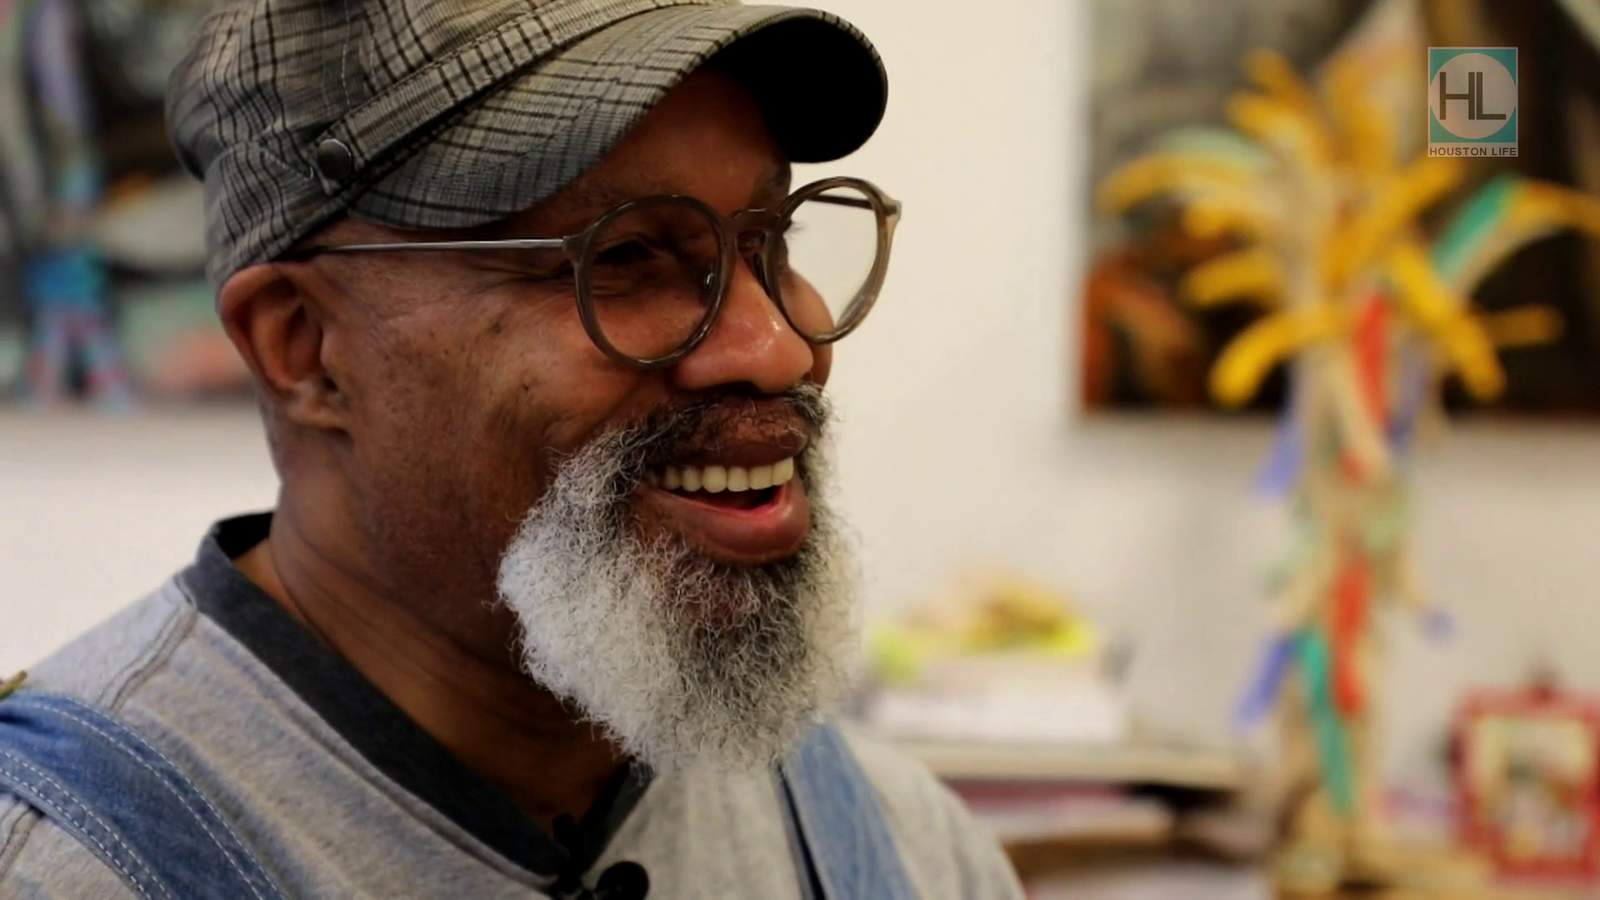 Meet Romeo Robinson, the local artist featuring African Americans in his artwork